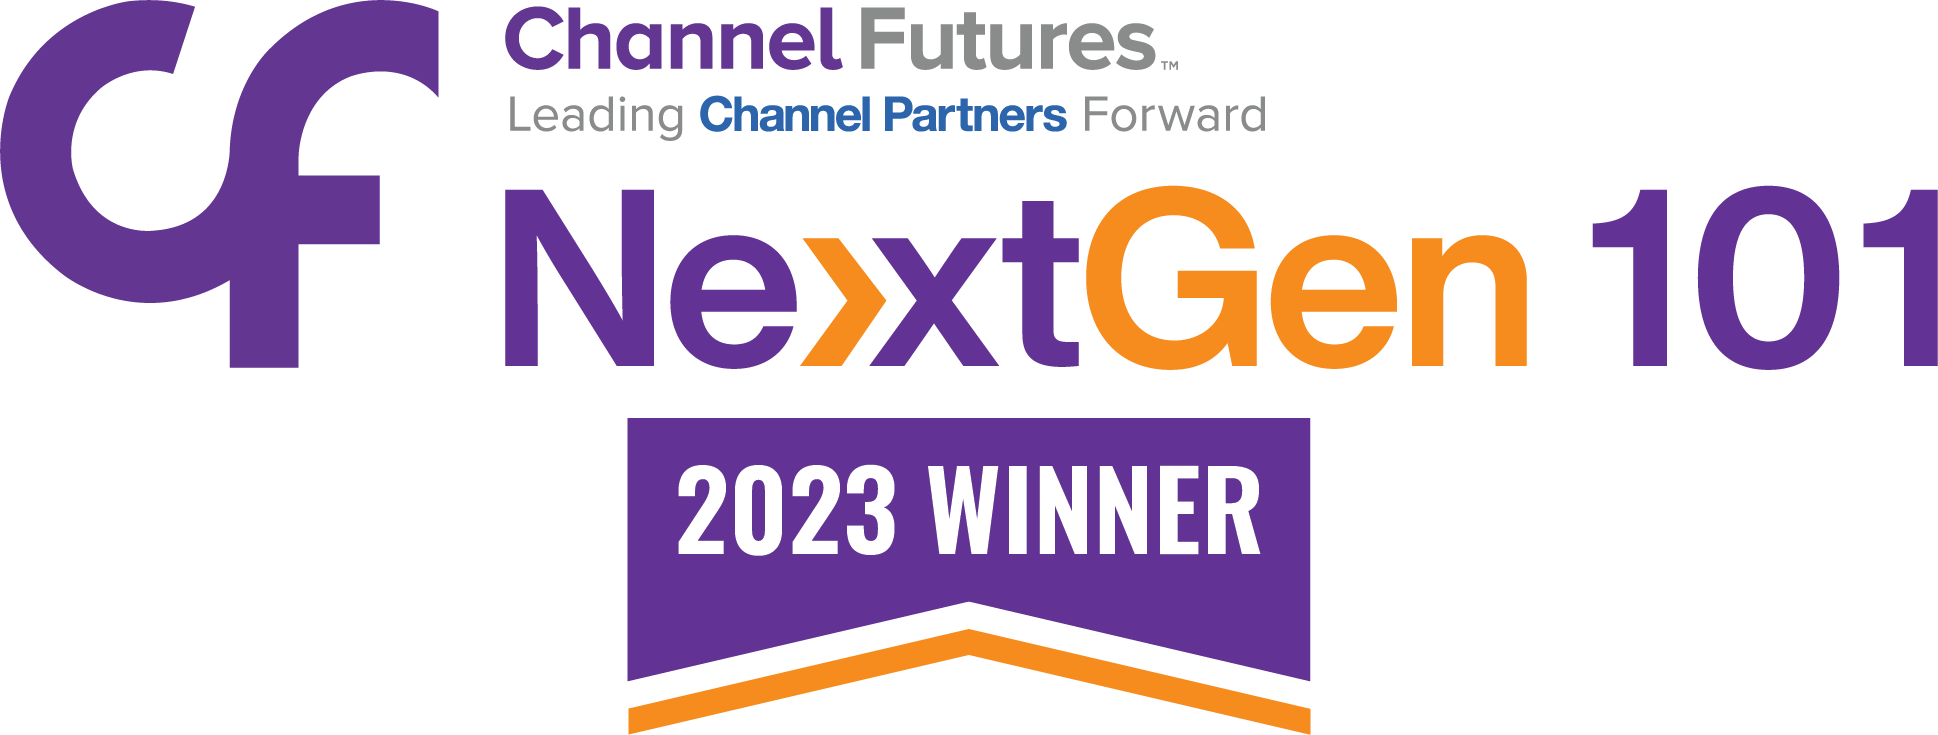 Channel NextGen101 2023 Official Winners Award Logo. Plain white background with the award name written in purple and orange.